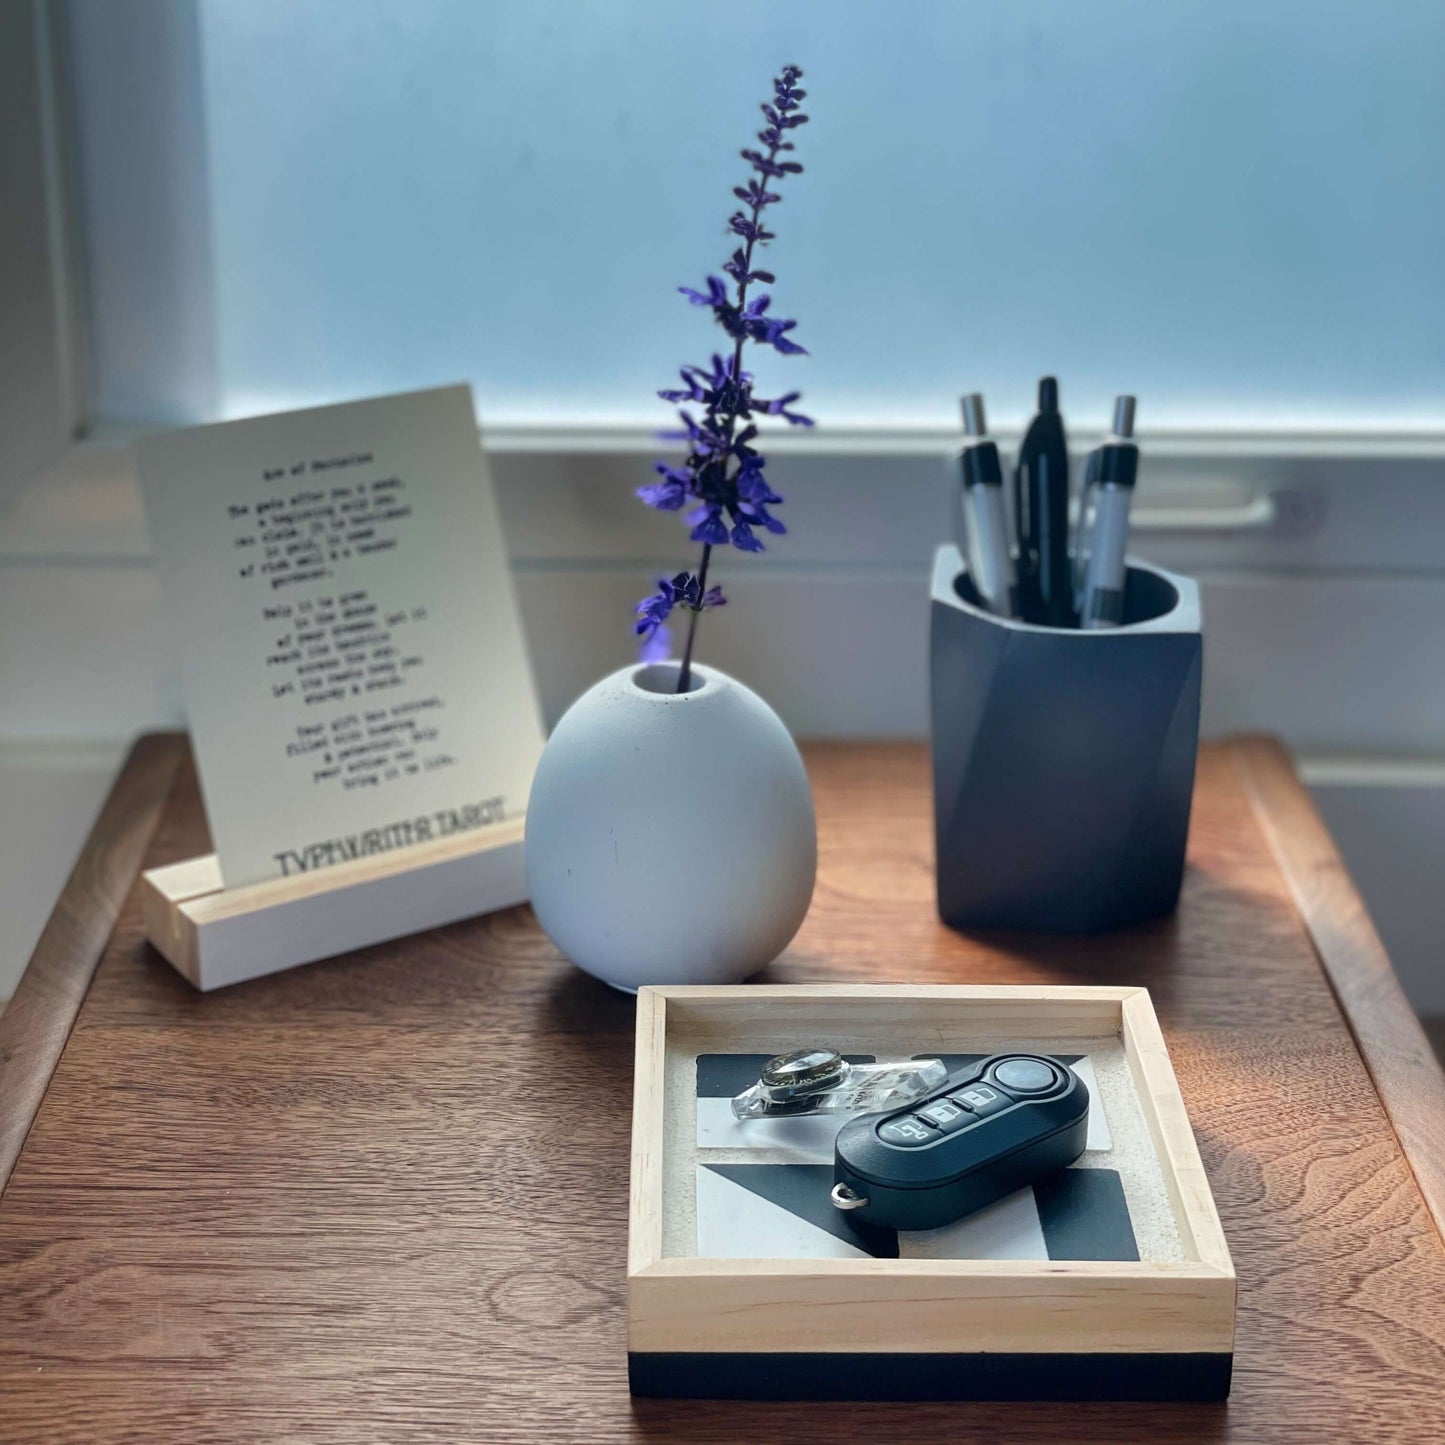 The Geometric planter used as a pen holder on a desk with other decor